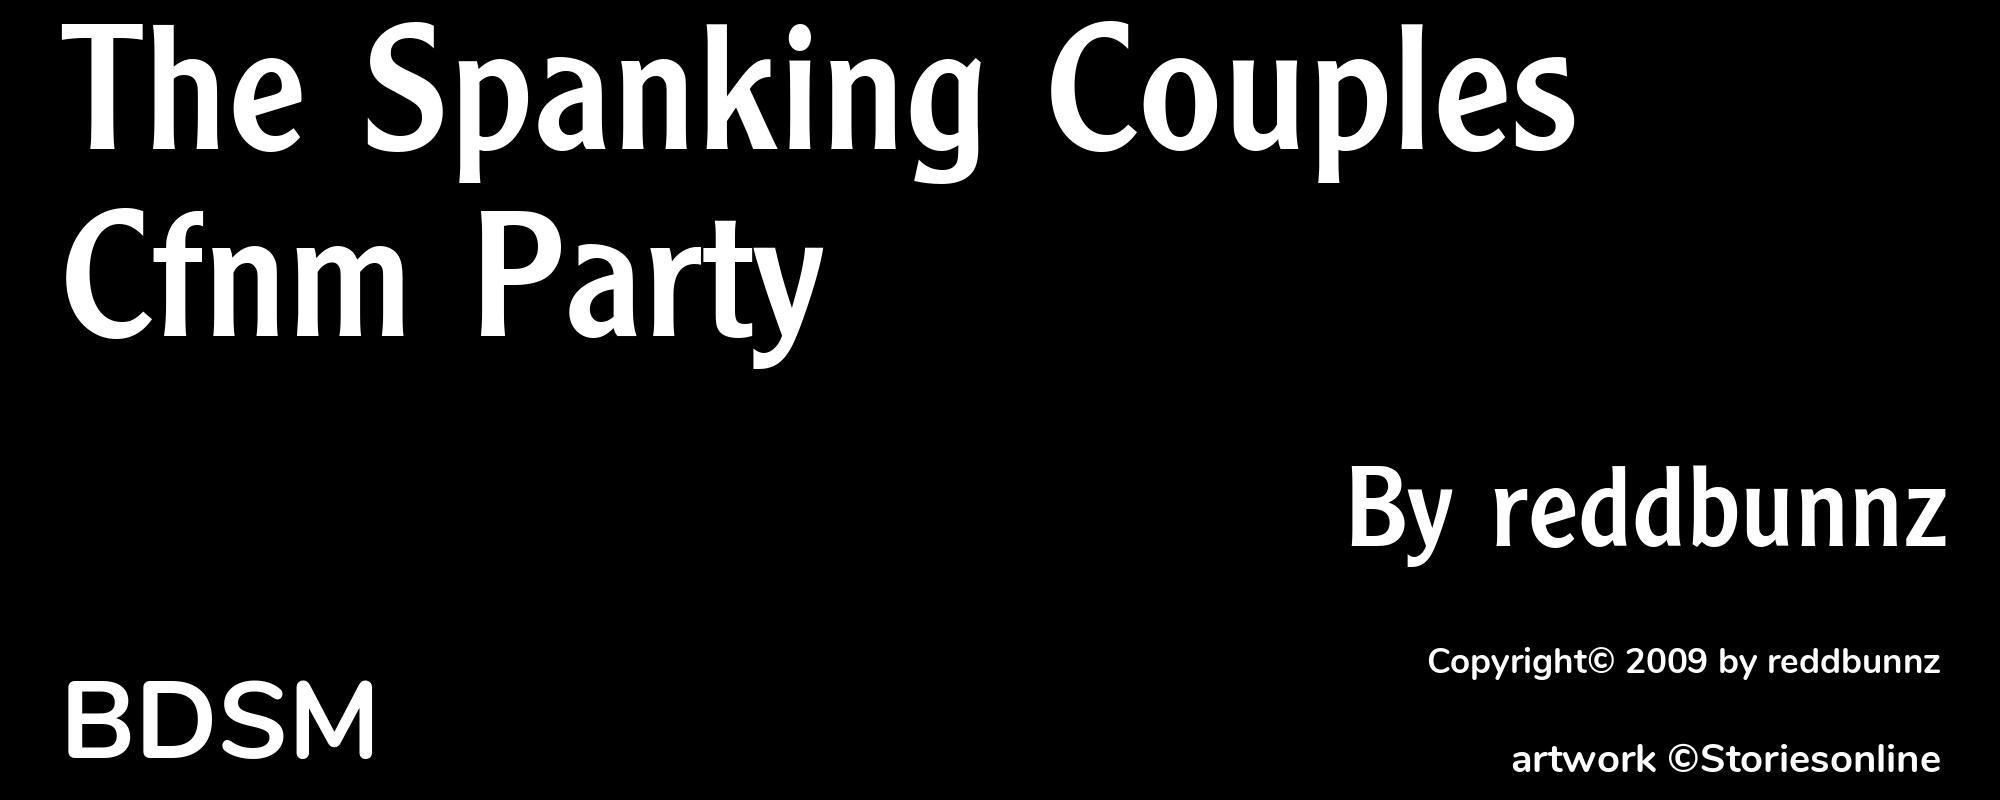 The Spanking Couples Cfnm Party - Cover